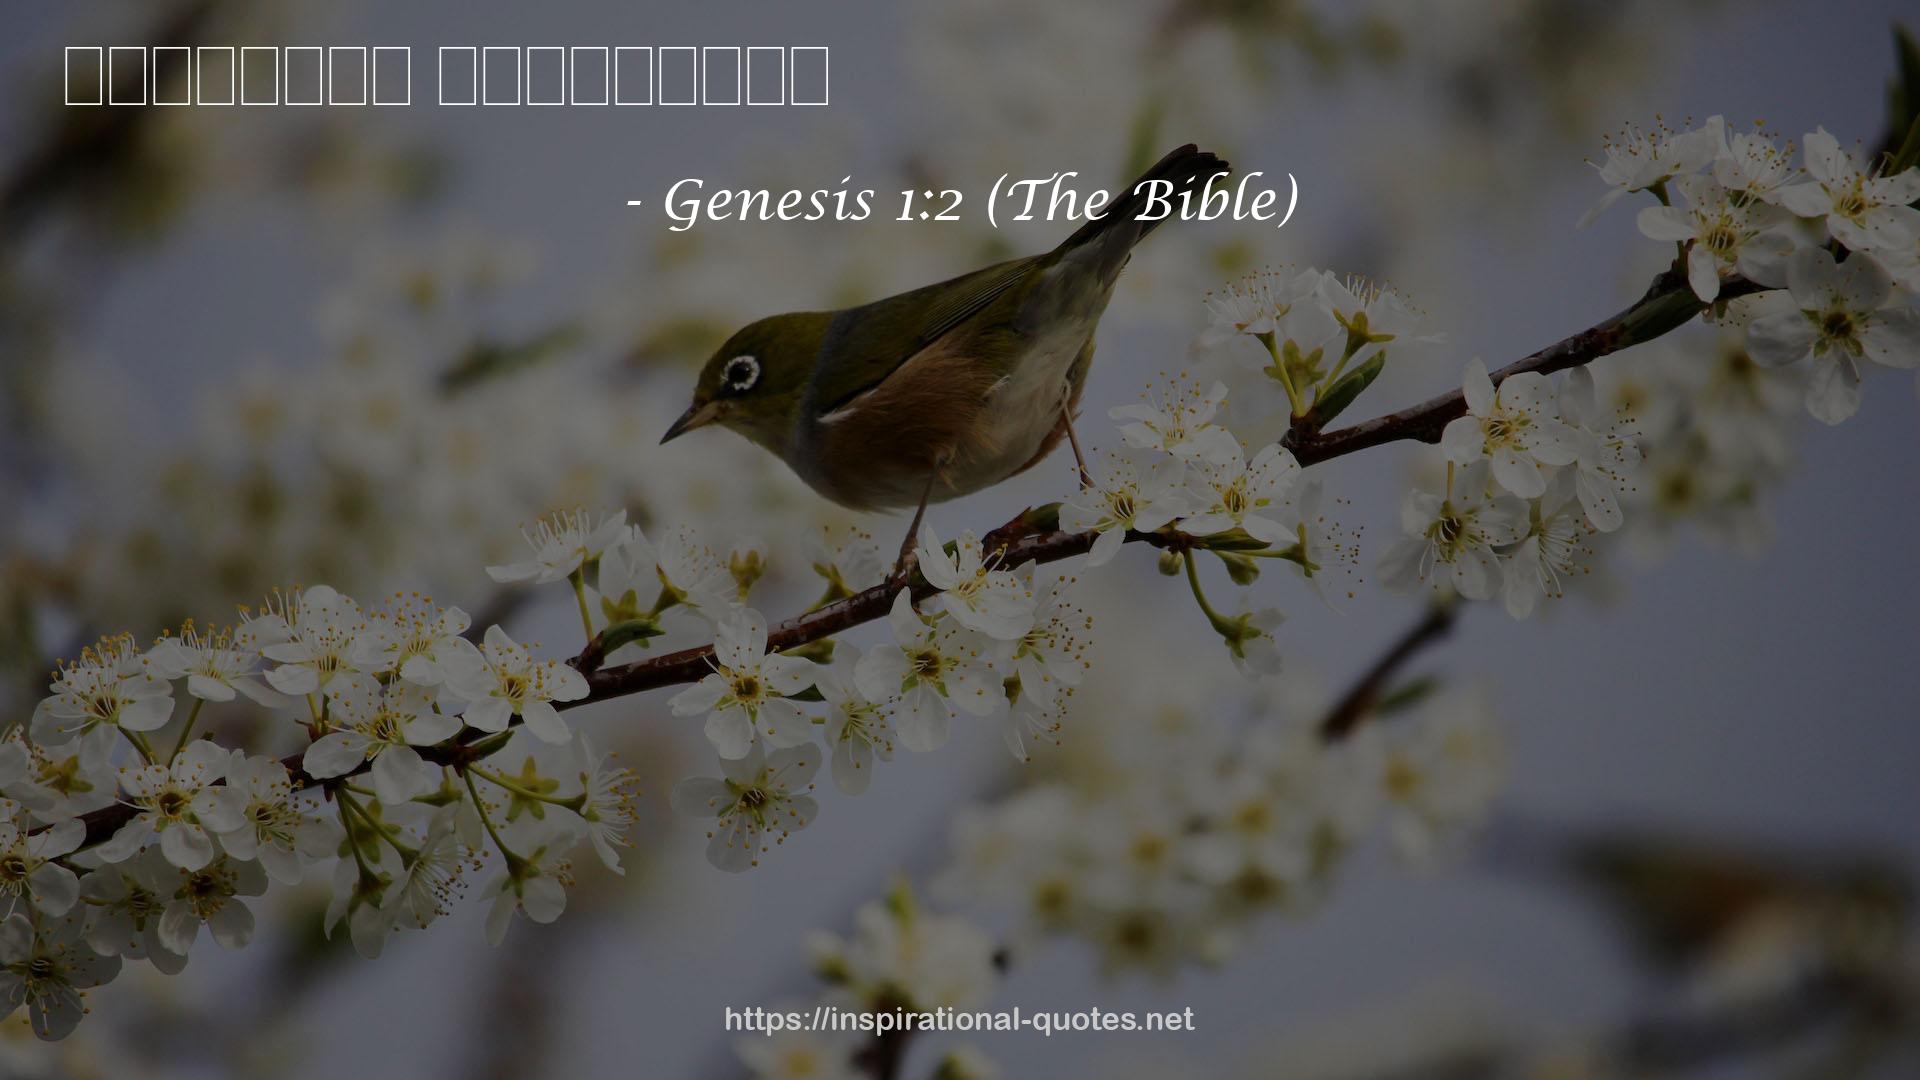 Genesis 1:2 (The Bible) QUOTES